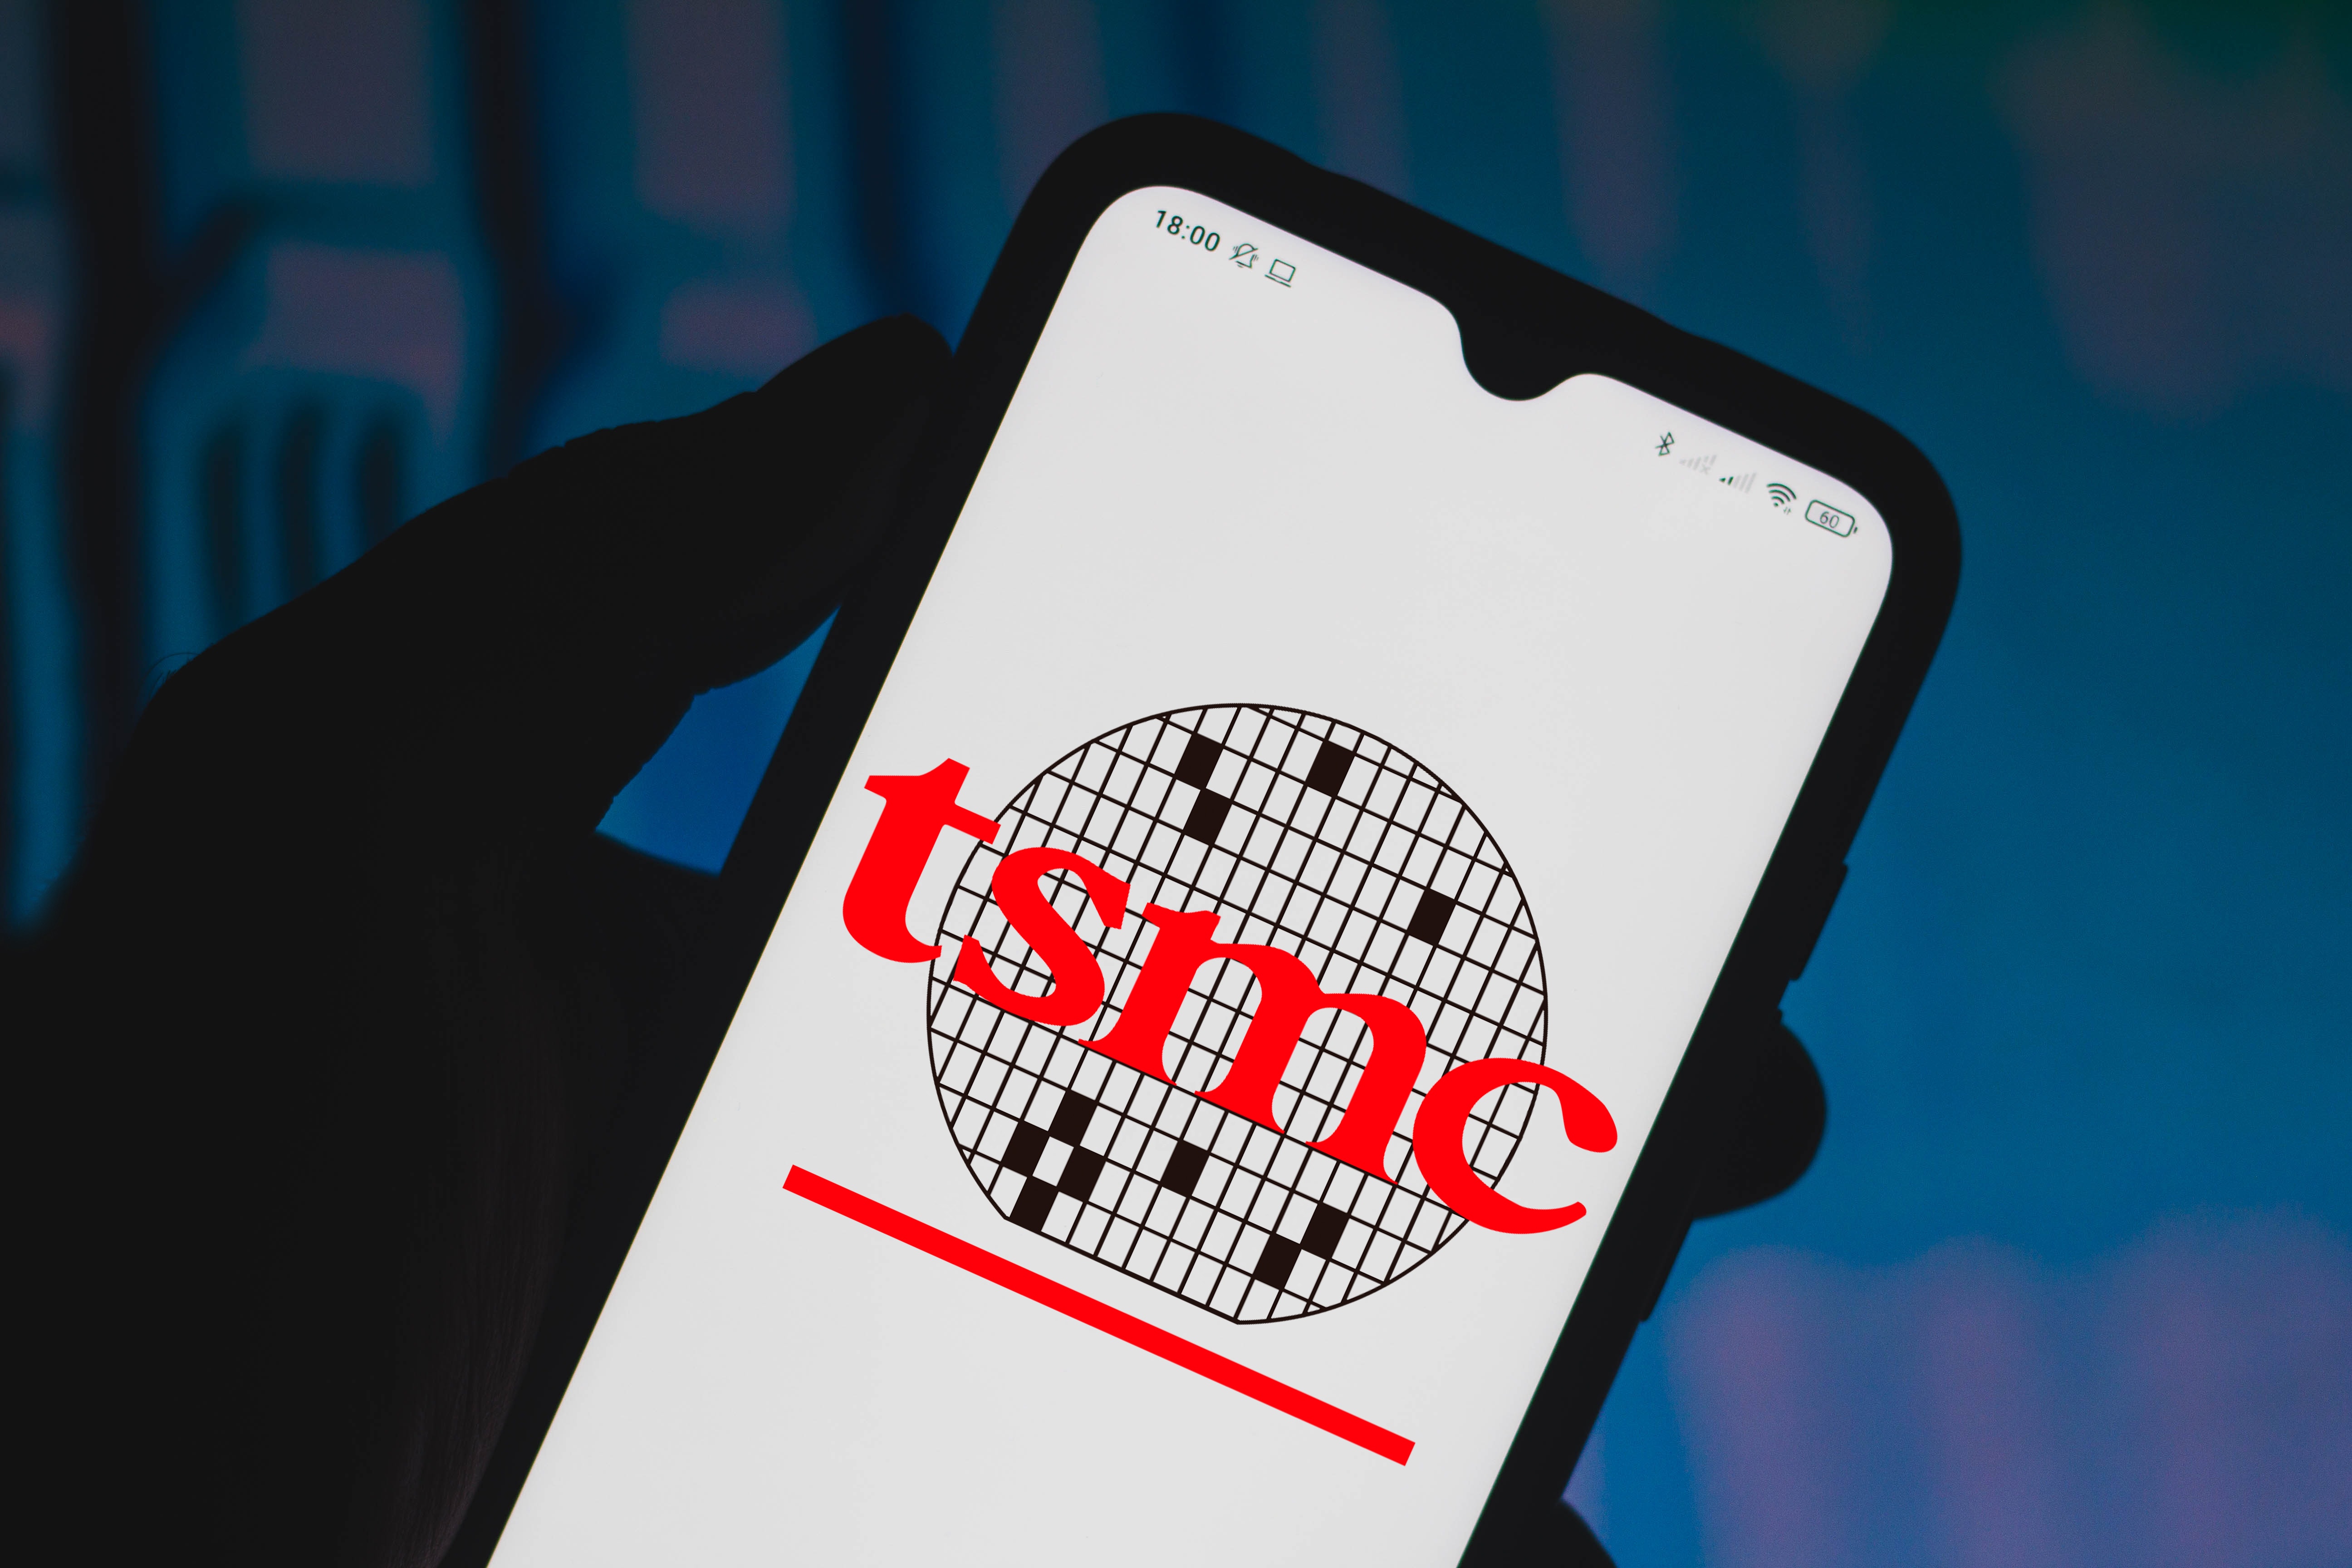 Apple Supplier TSMC And Other Chip Suppliers' Stocks Plunge After US Curbs On China